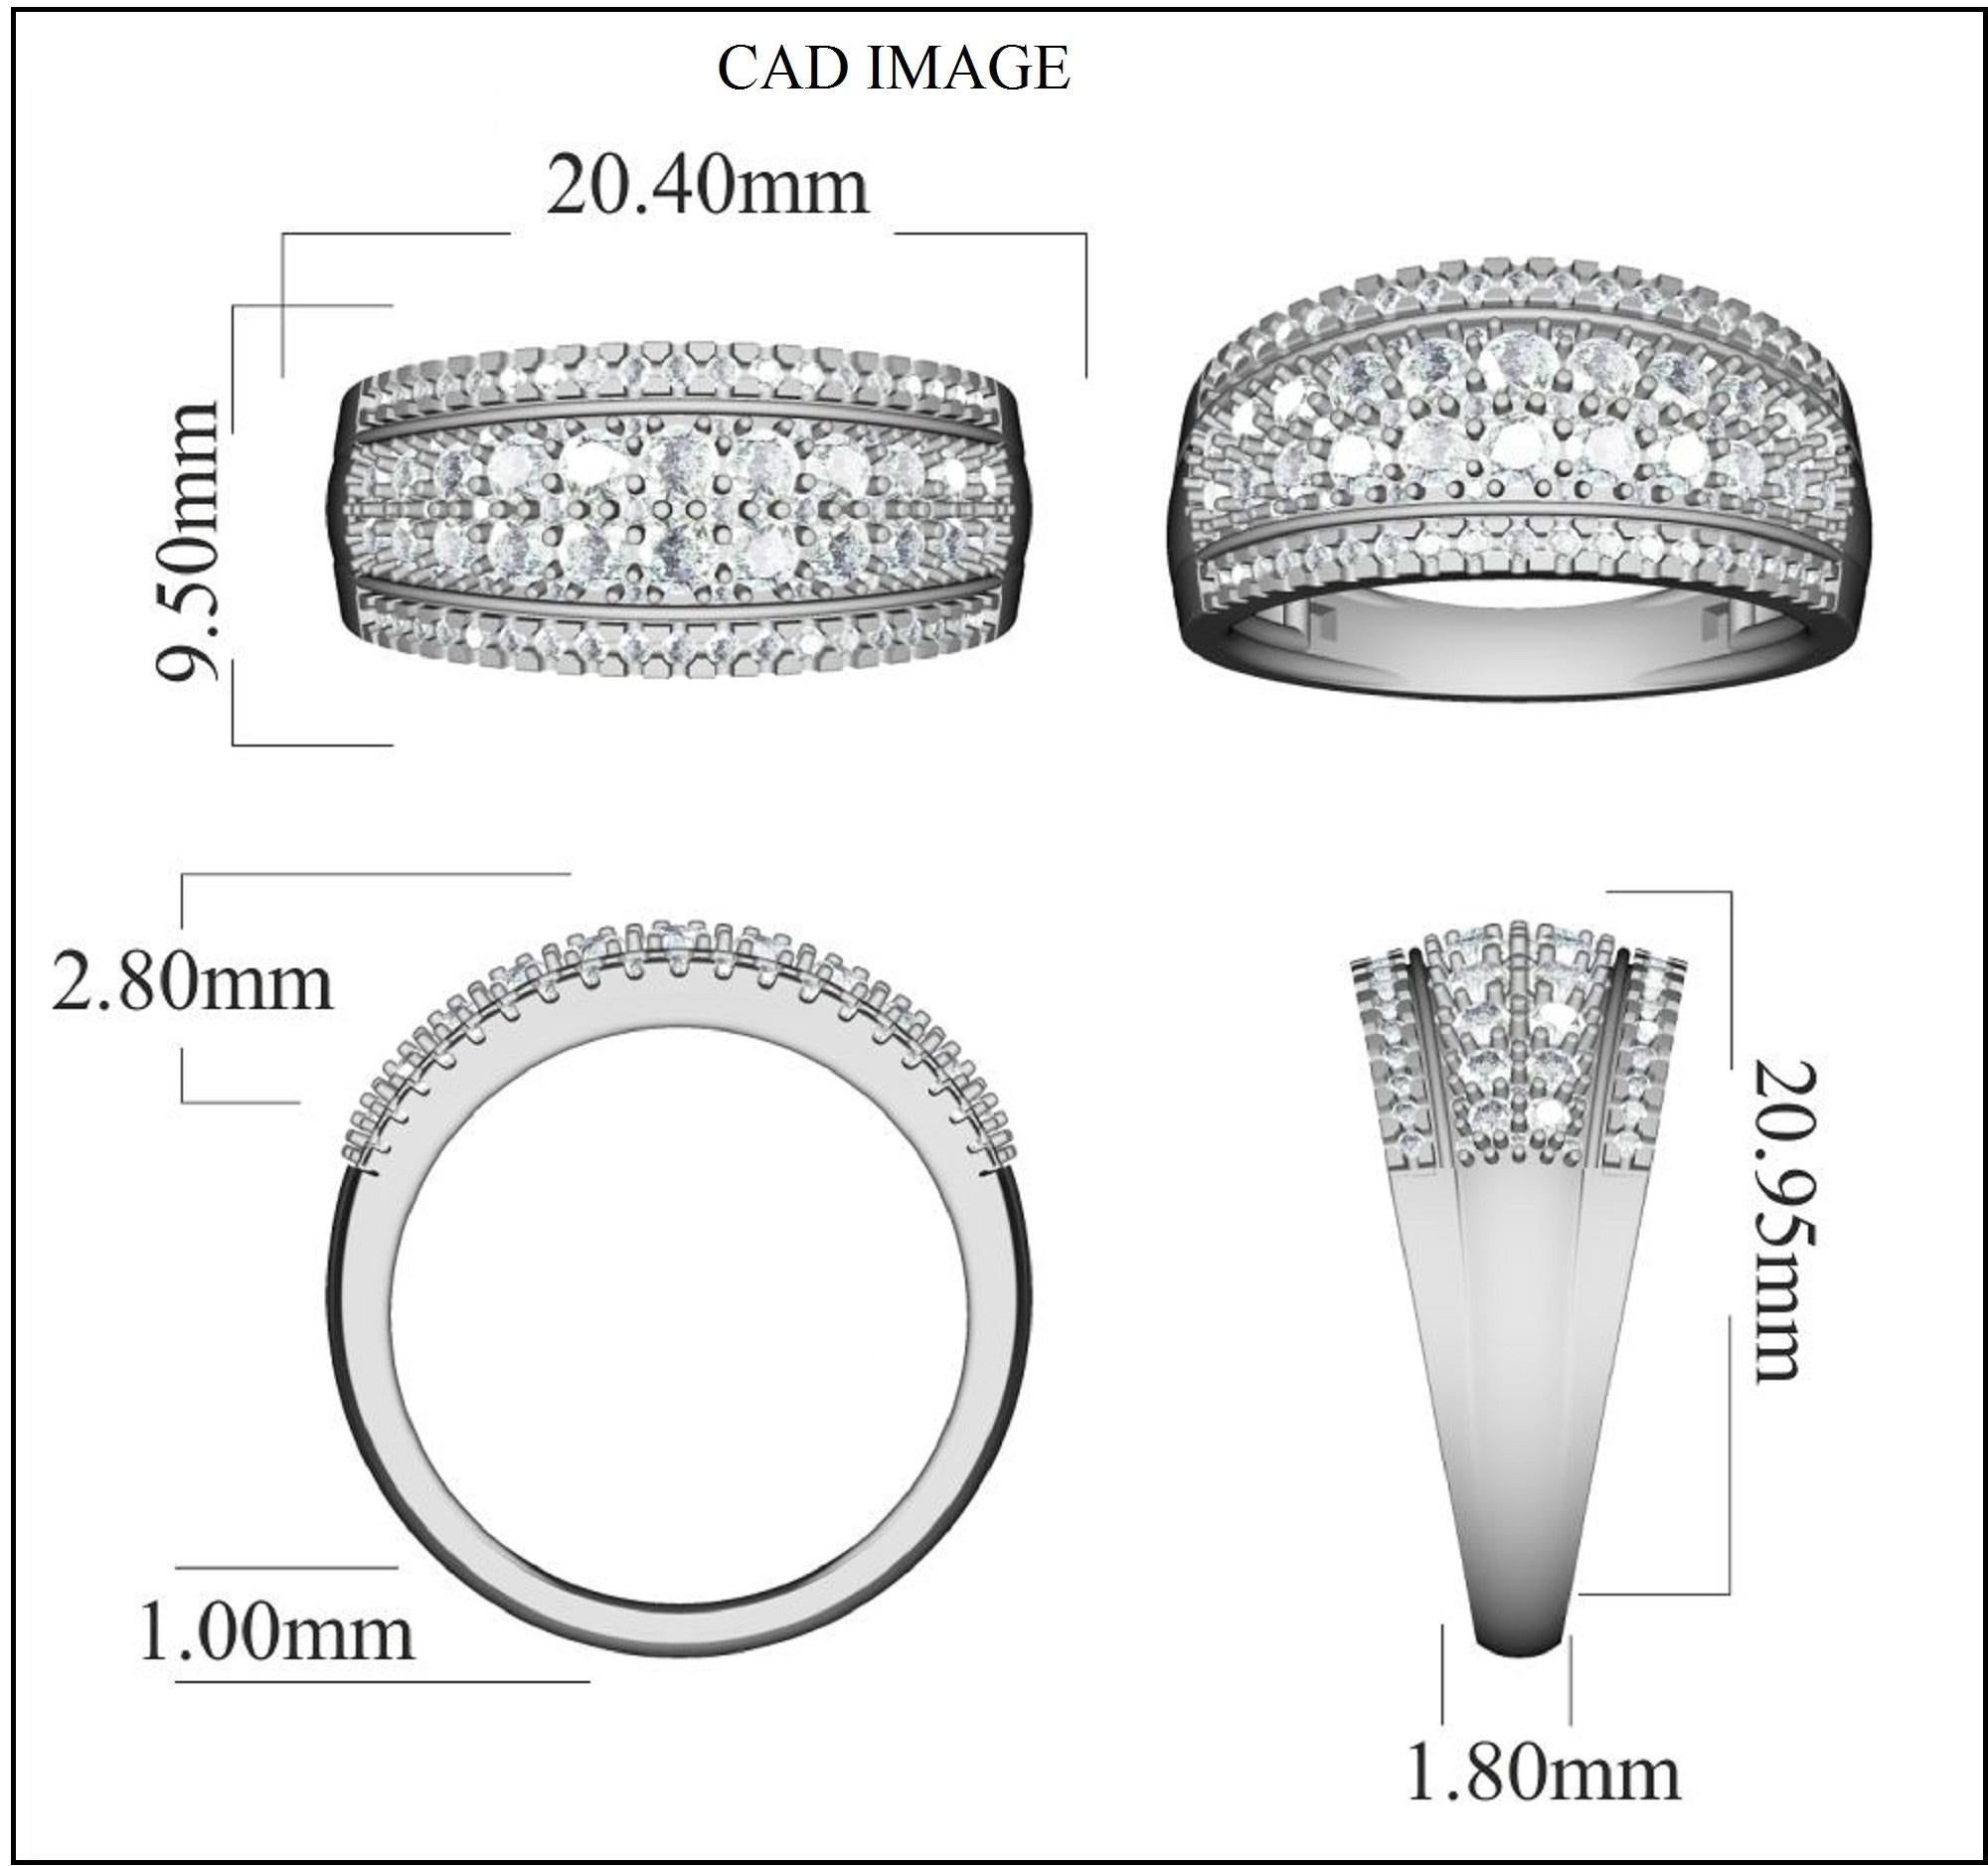 Truly exquisite, this  Multi row wide diamond  ring is sure to be admired for the inherent classic beauty and elegance within its design. The total weight of diamonds 1.00 carat, H-I color, I2 Clarity and studded with 96 round brilliant diamond set